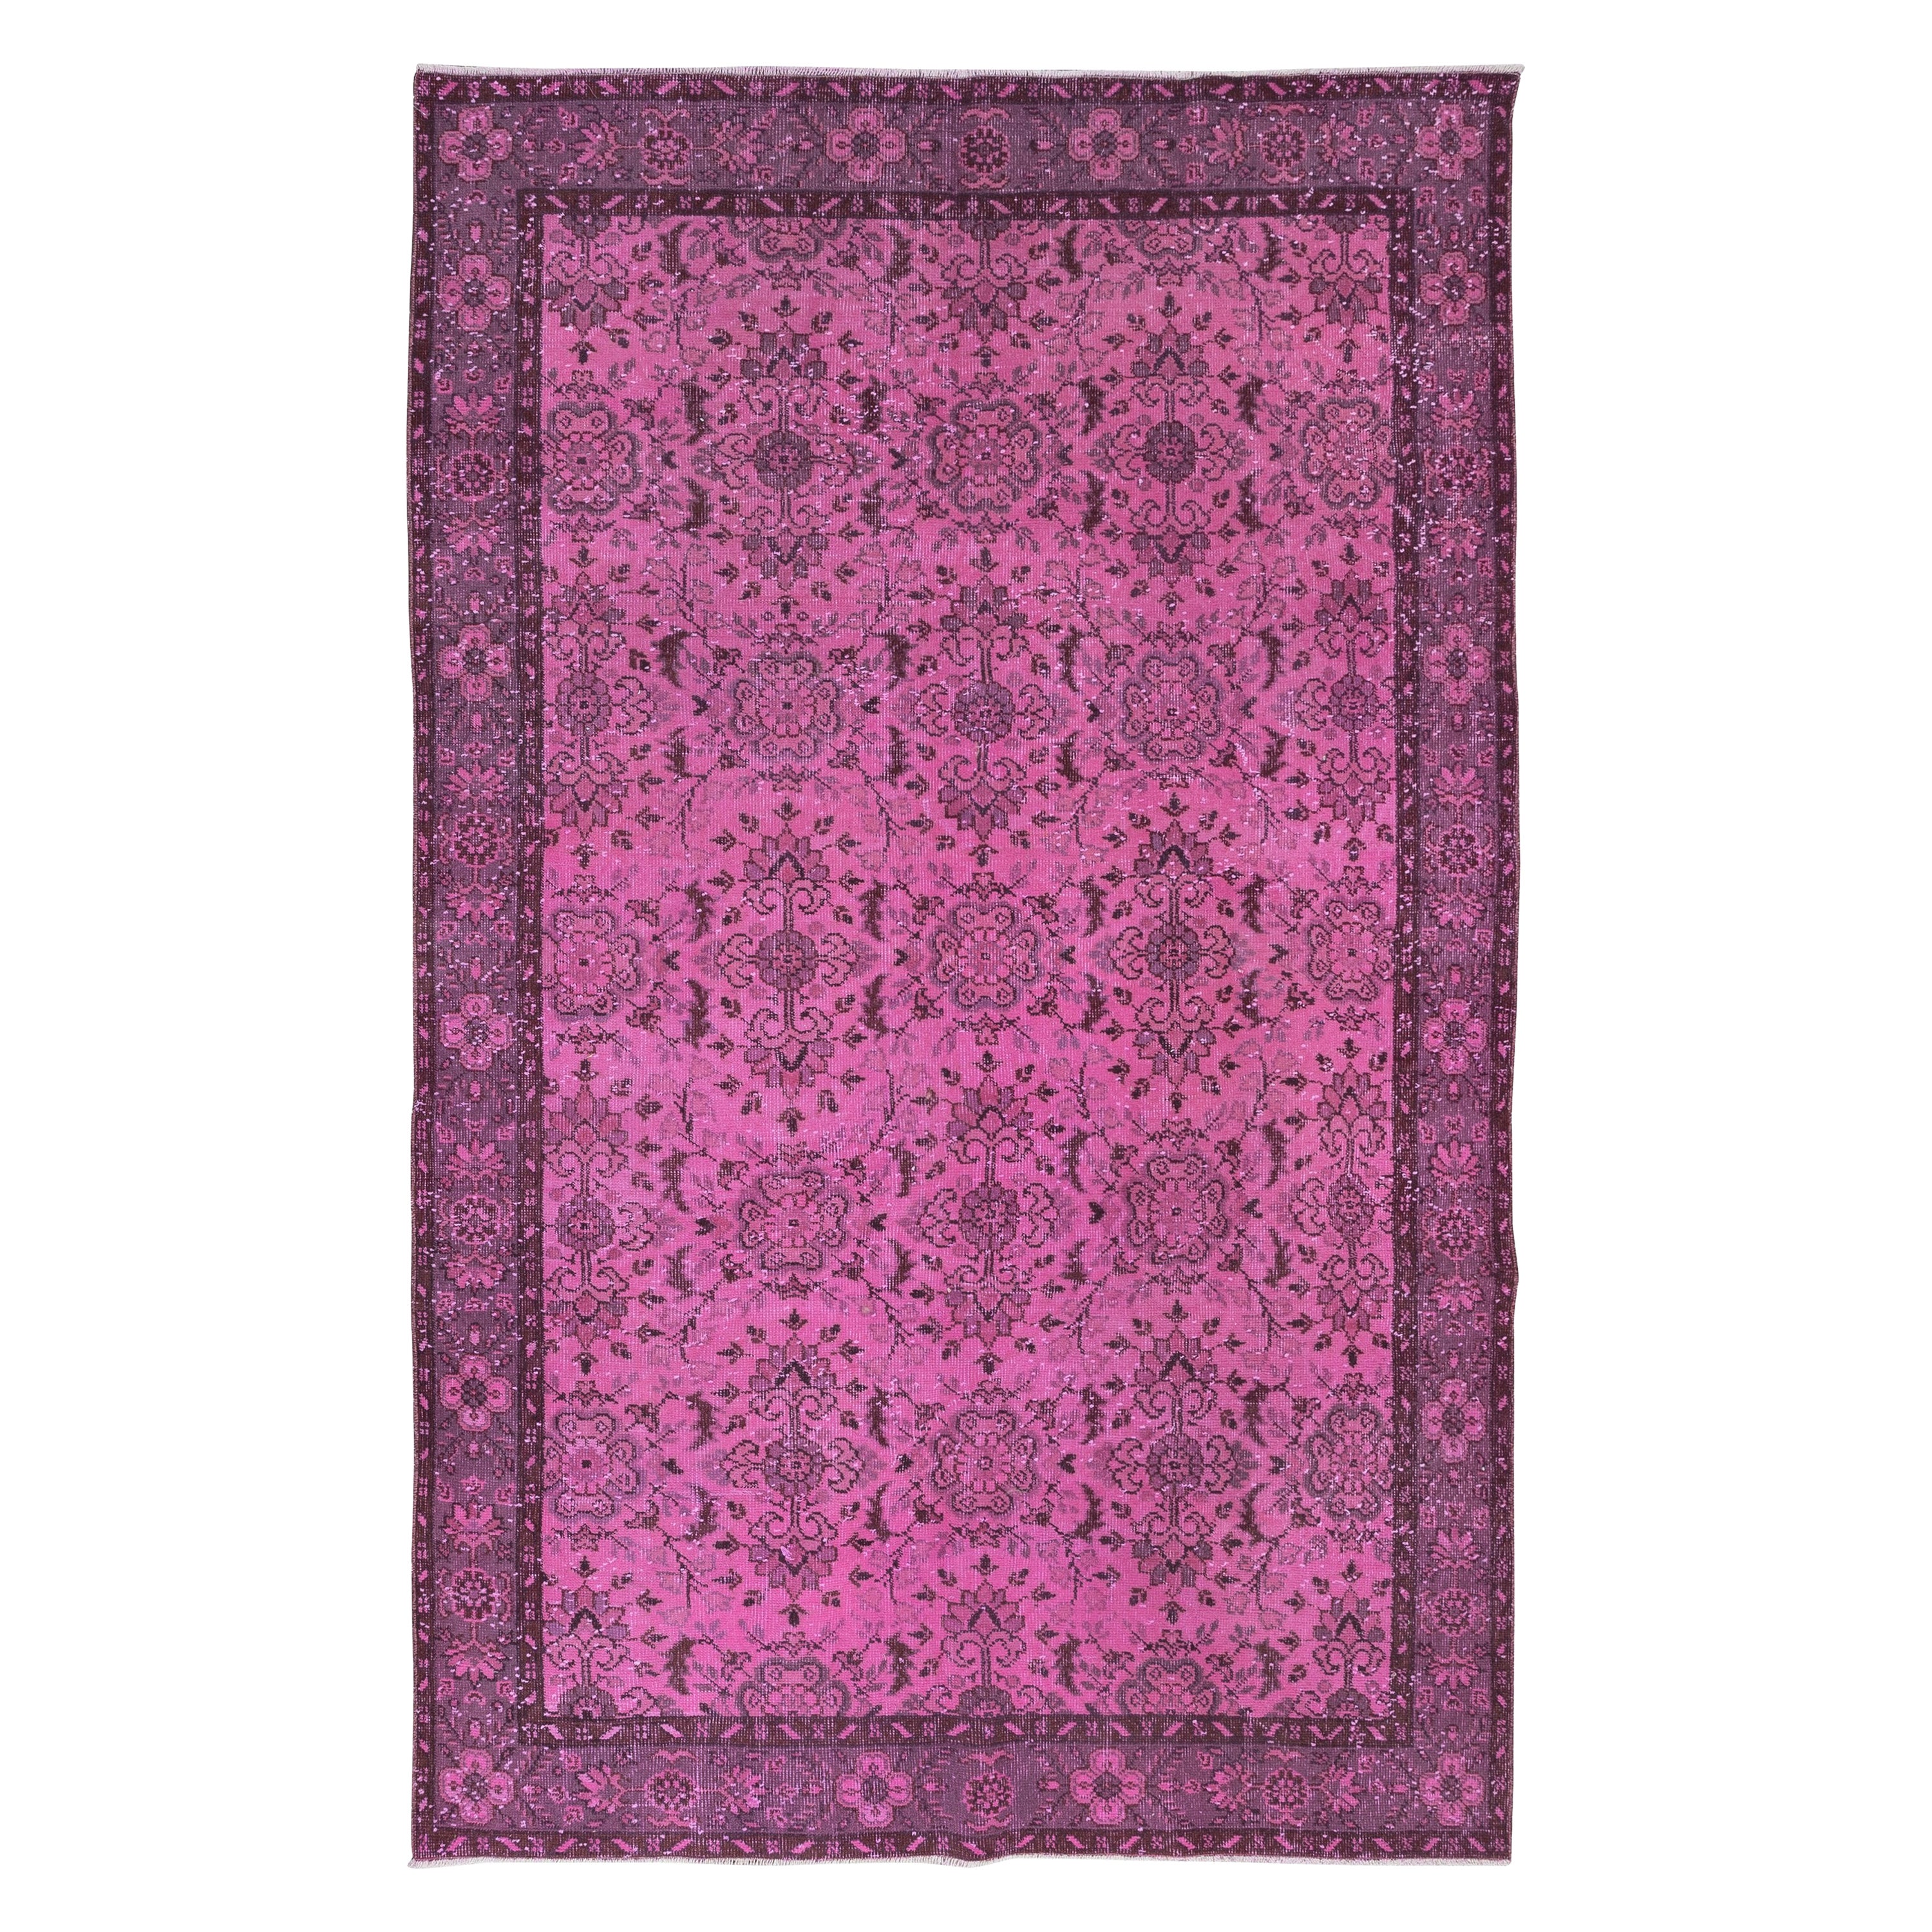 6x9.3 Ft Floral Pattern Handknotted Pink Rug, Modern Turkish Overdyed Carpet For Sale